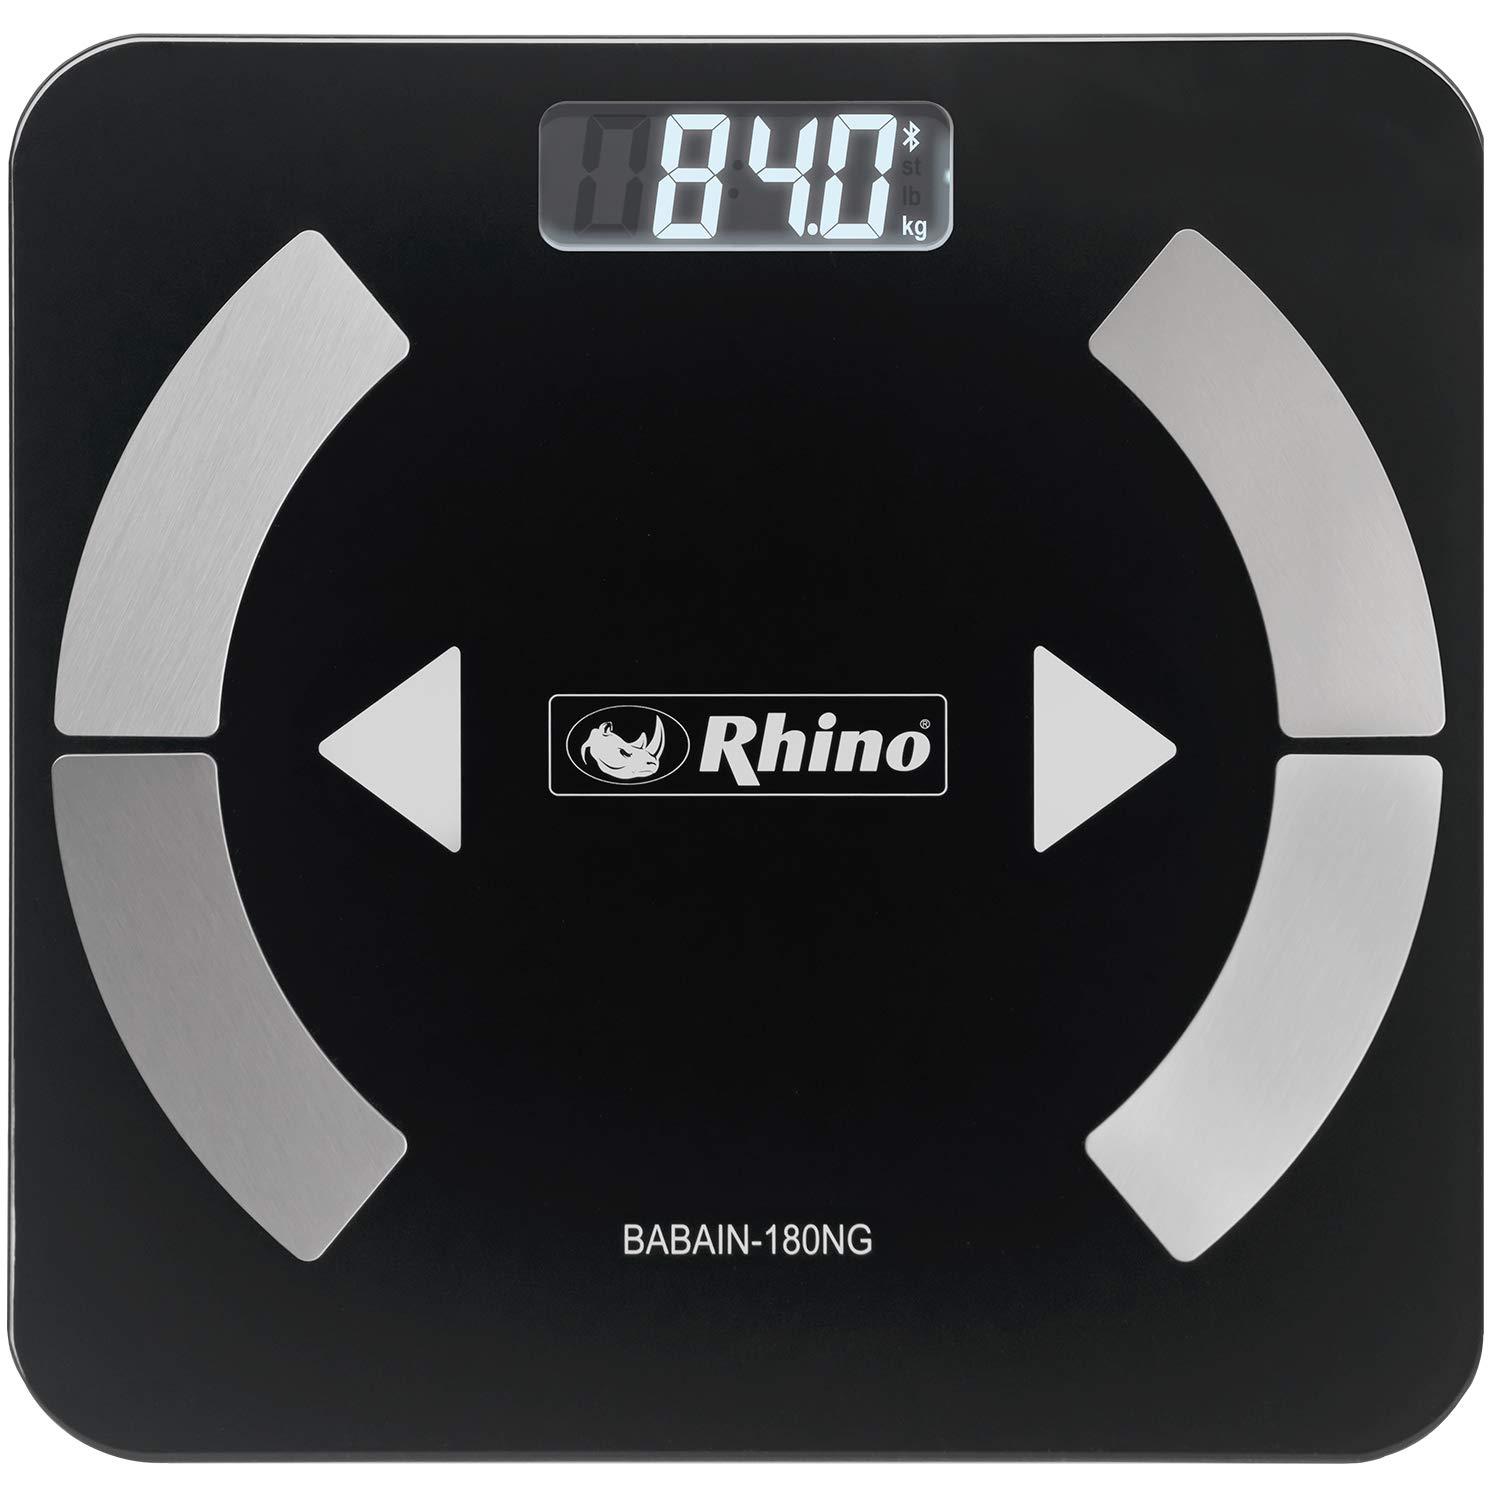  RHINO Smart Scale for Body Weight, High Precision, Bluetooth,  Fitdays App, iOS and Android, Bathroom Wireless Machine for Fat, Muscle,  BMI, 14 Body Indicators, 400lb (Black) : Health & Household